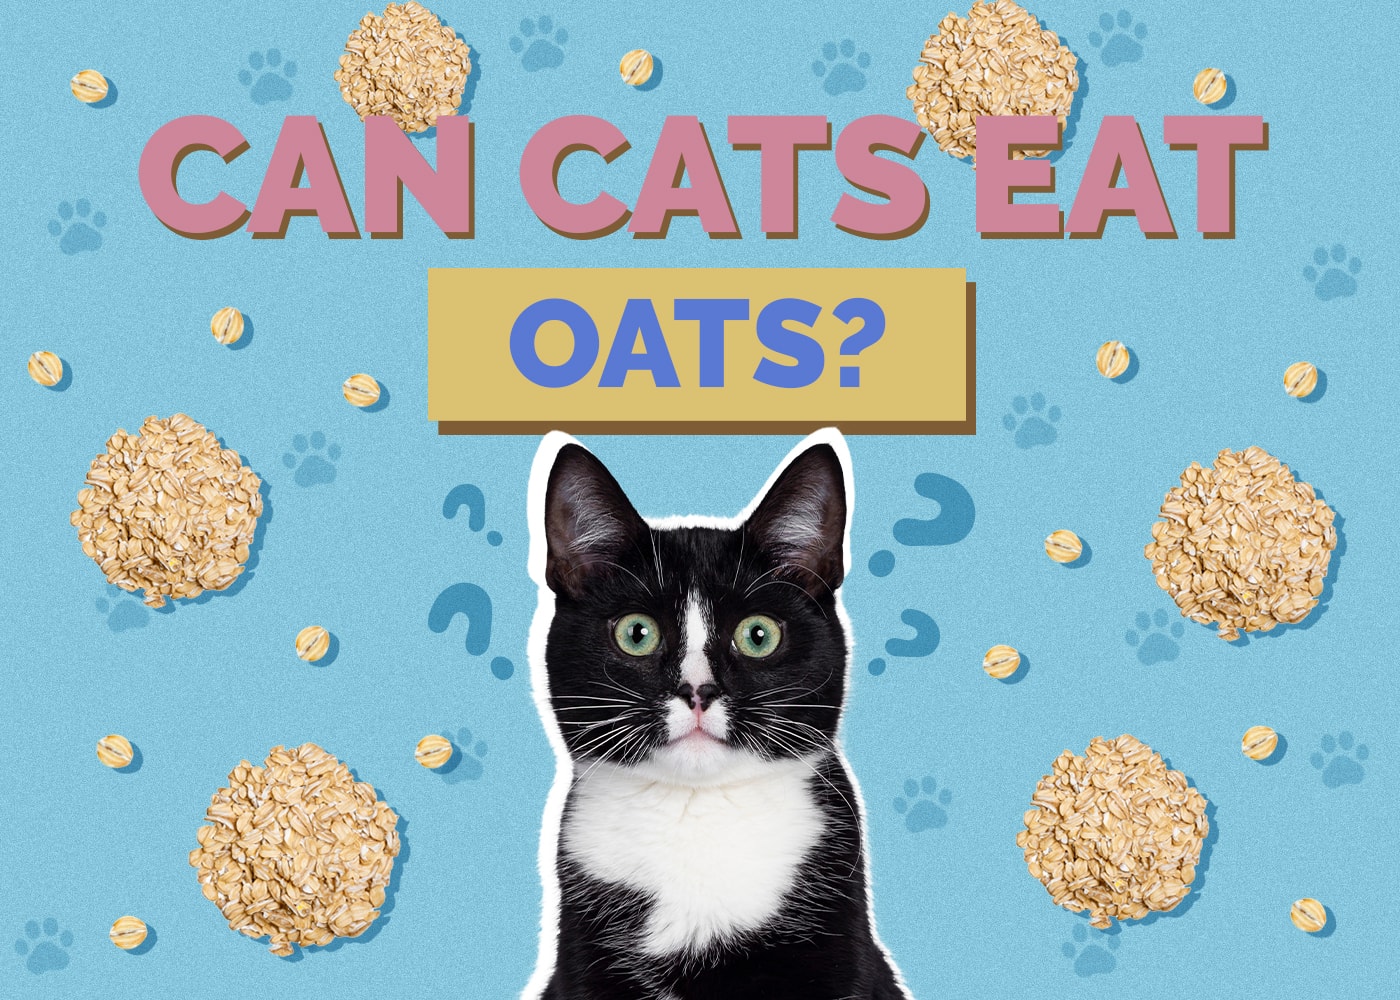 Can Cats Eat oats